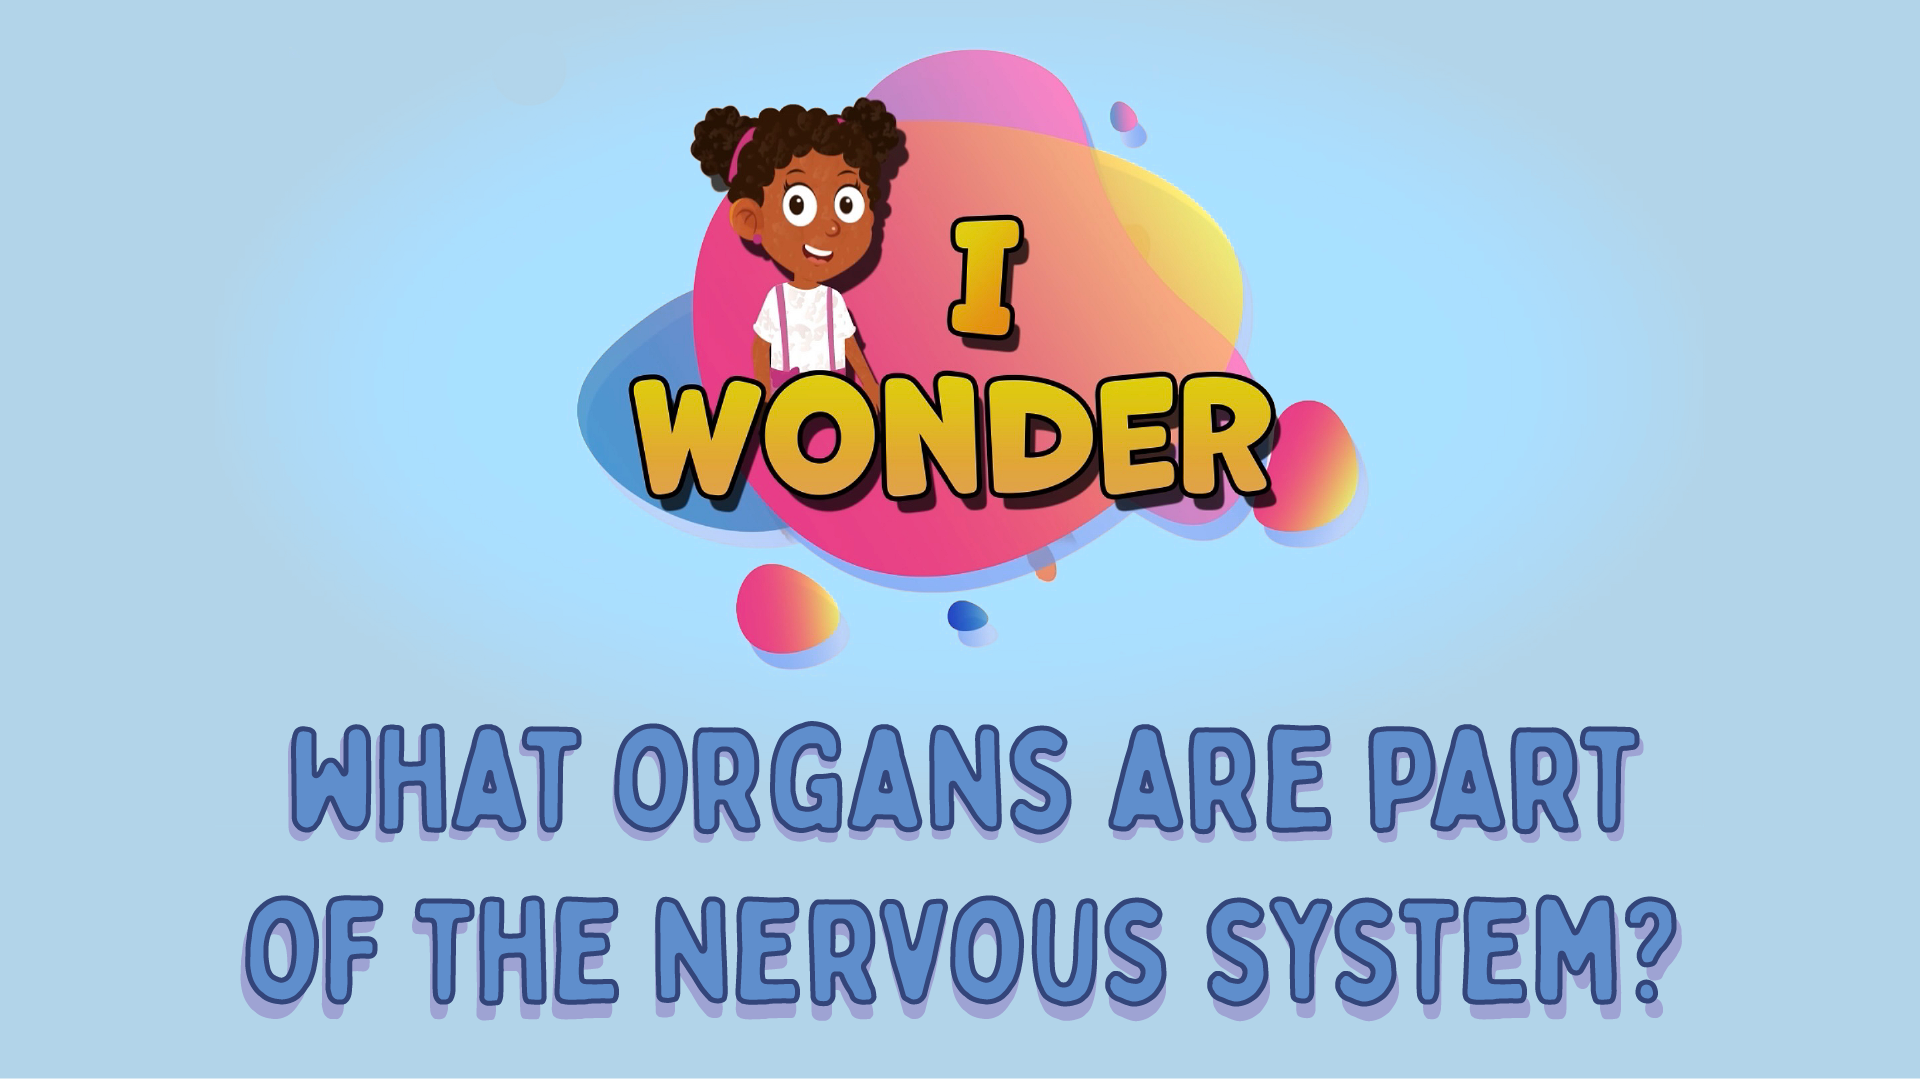 What Organs Are Part Of The Nervous System?